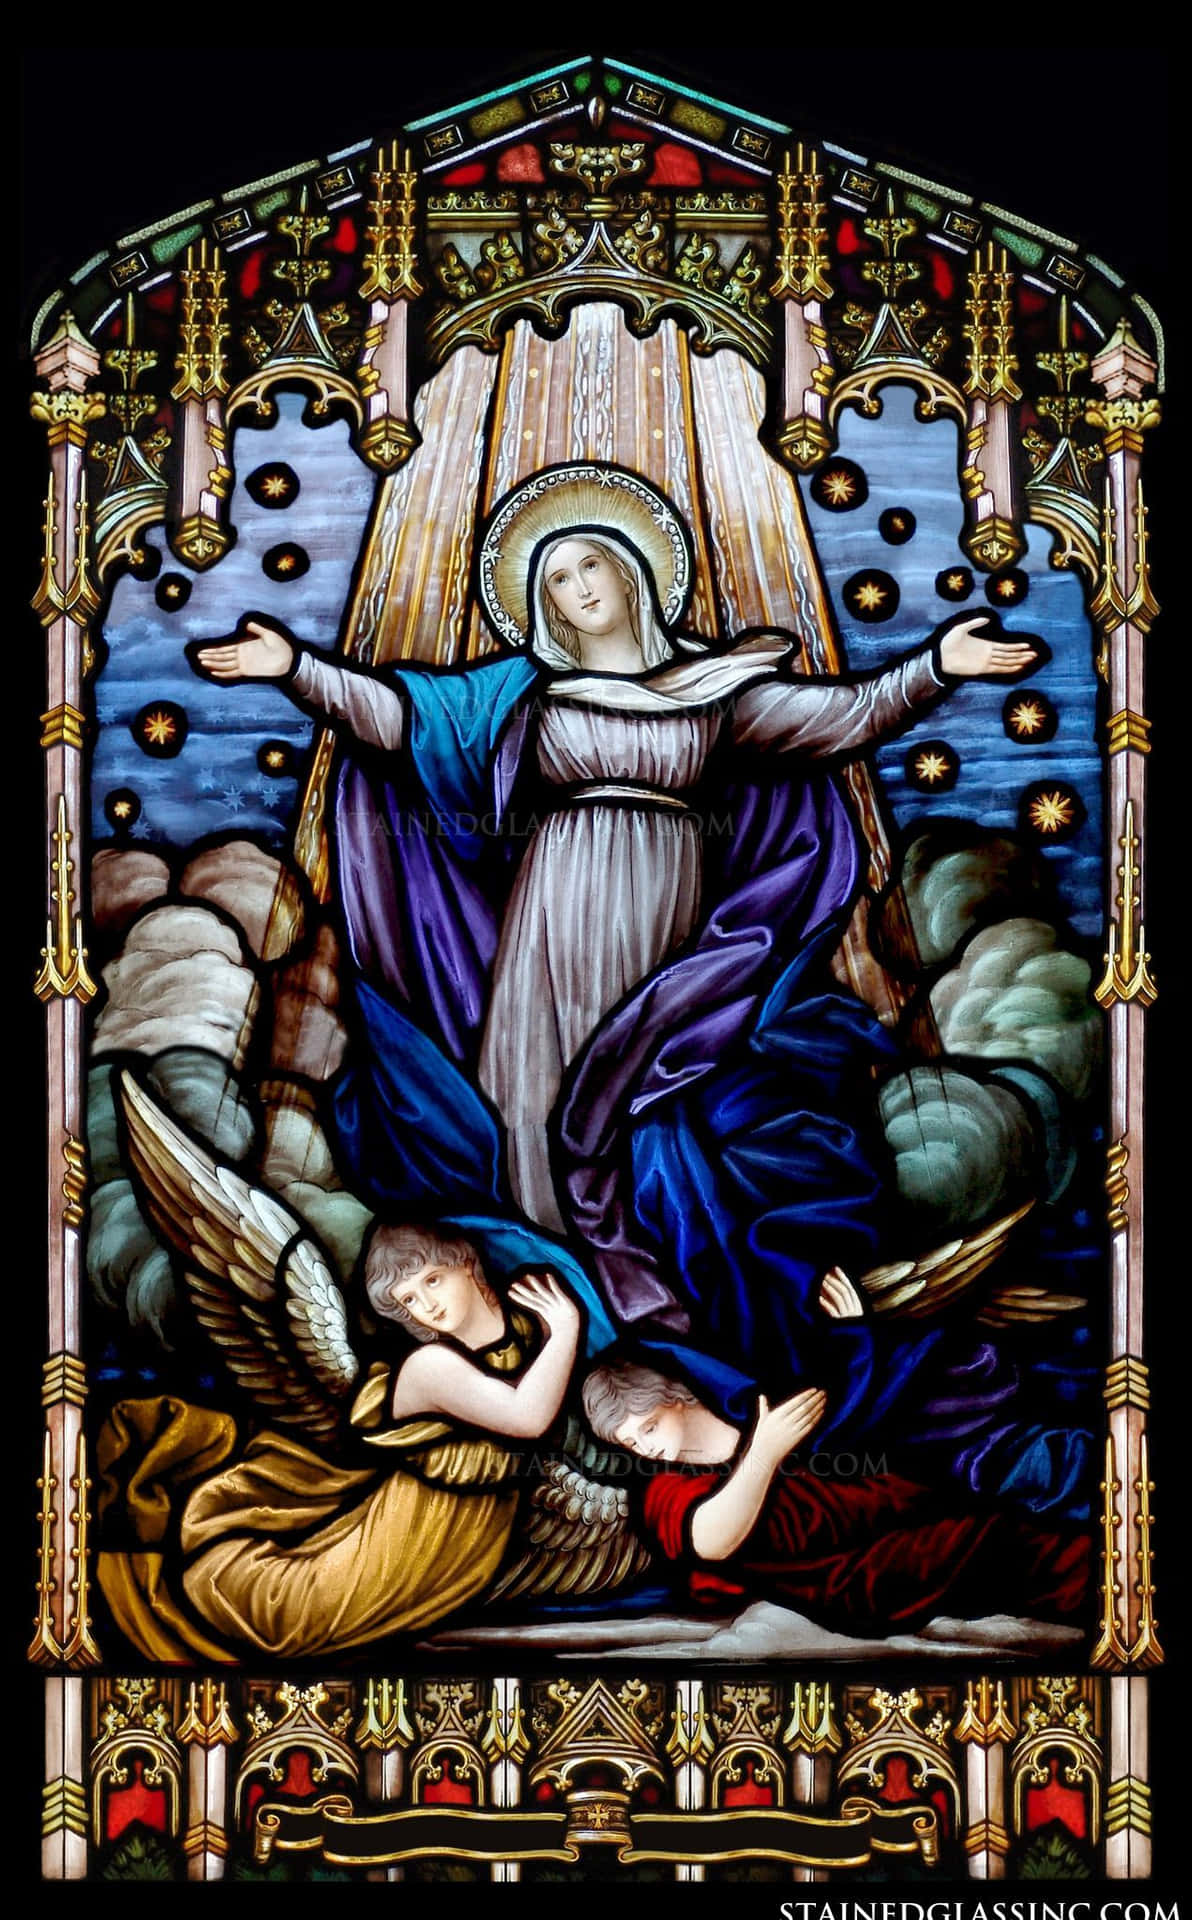 Caption: "sacred Depiction Of The Assumption Of Mother Mary" Wallpaper